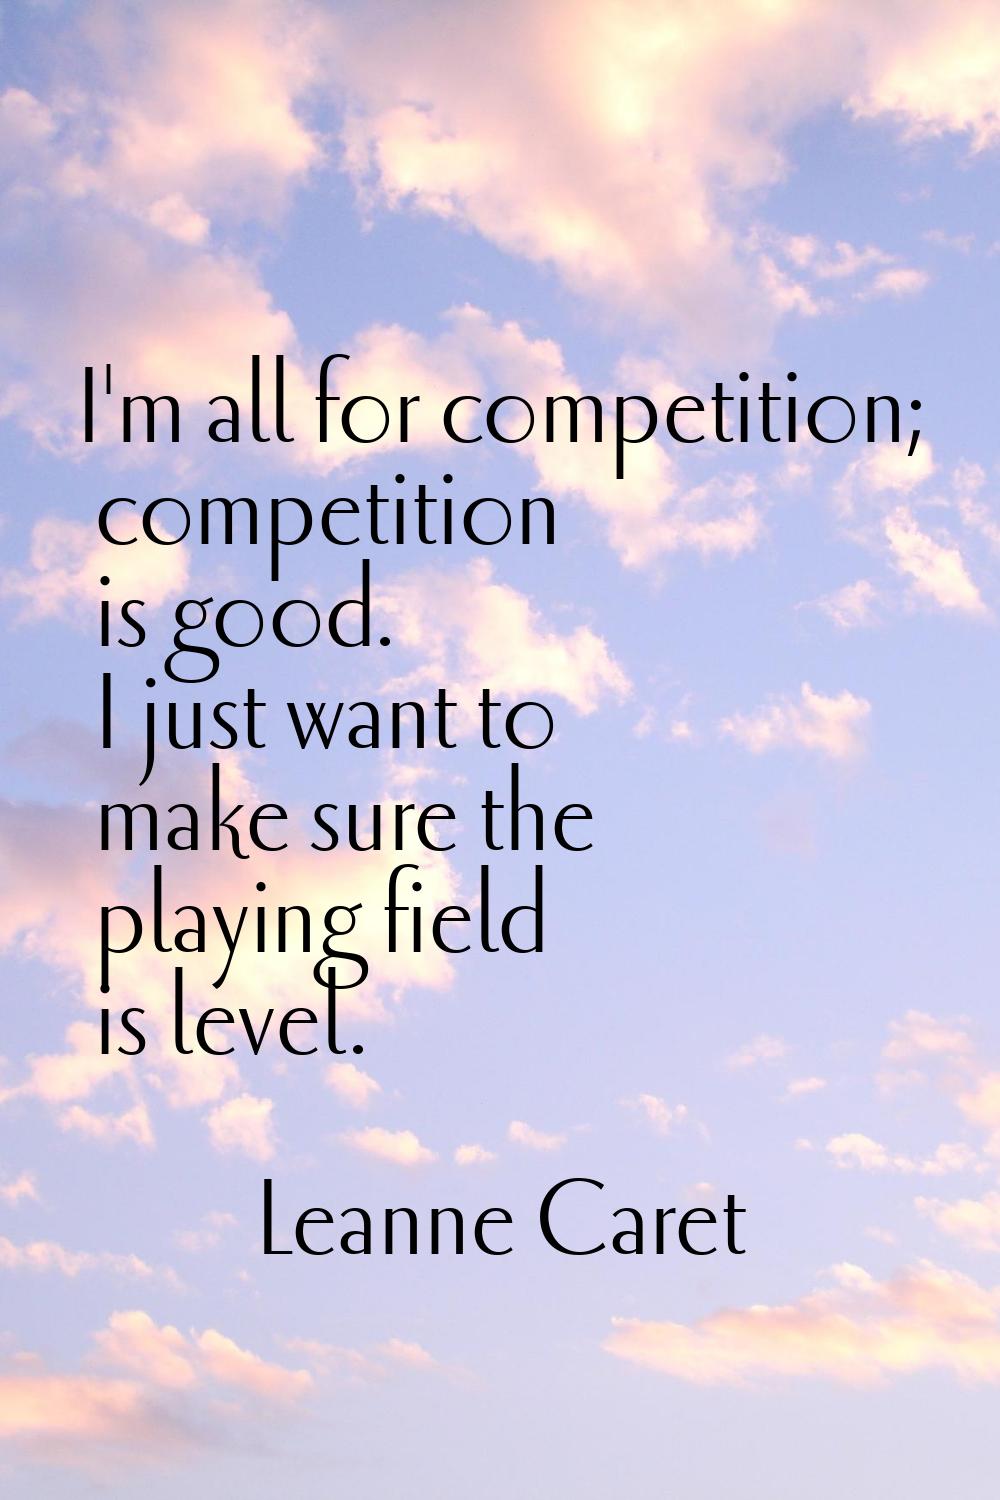 I'm all for competition; competition is good. I just want to make sure the playing field is level.